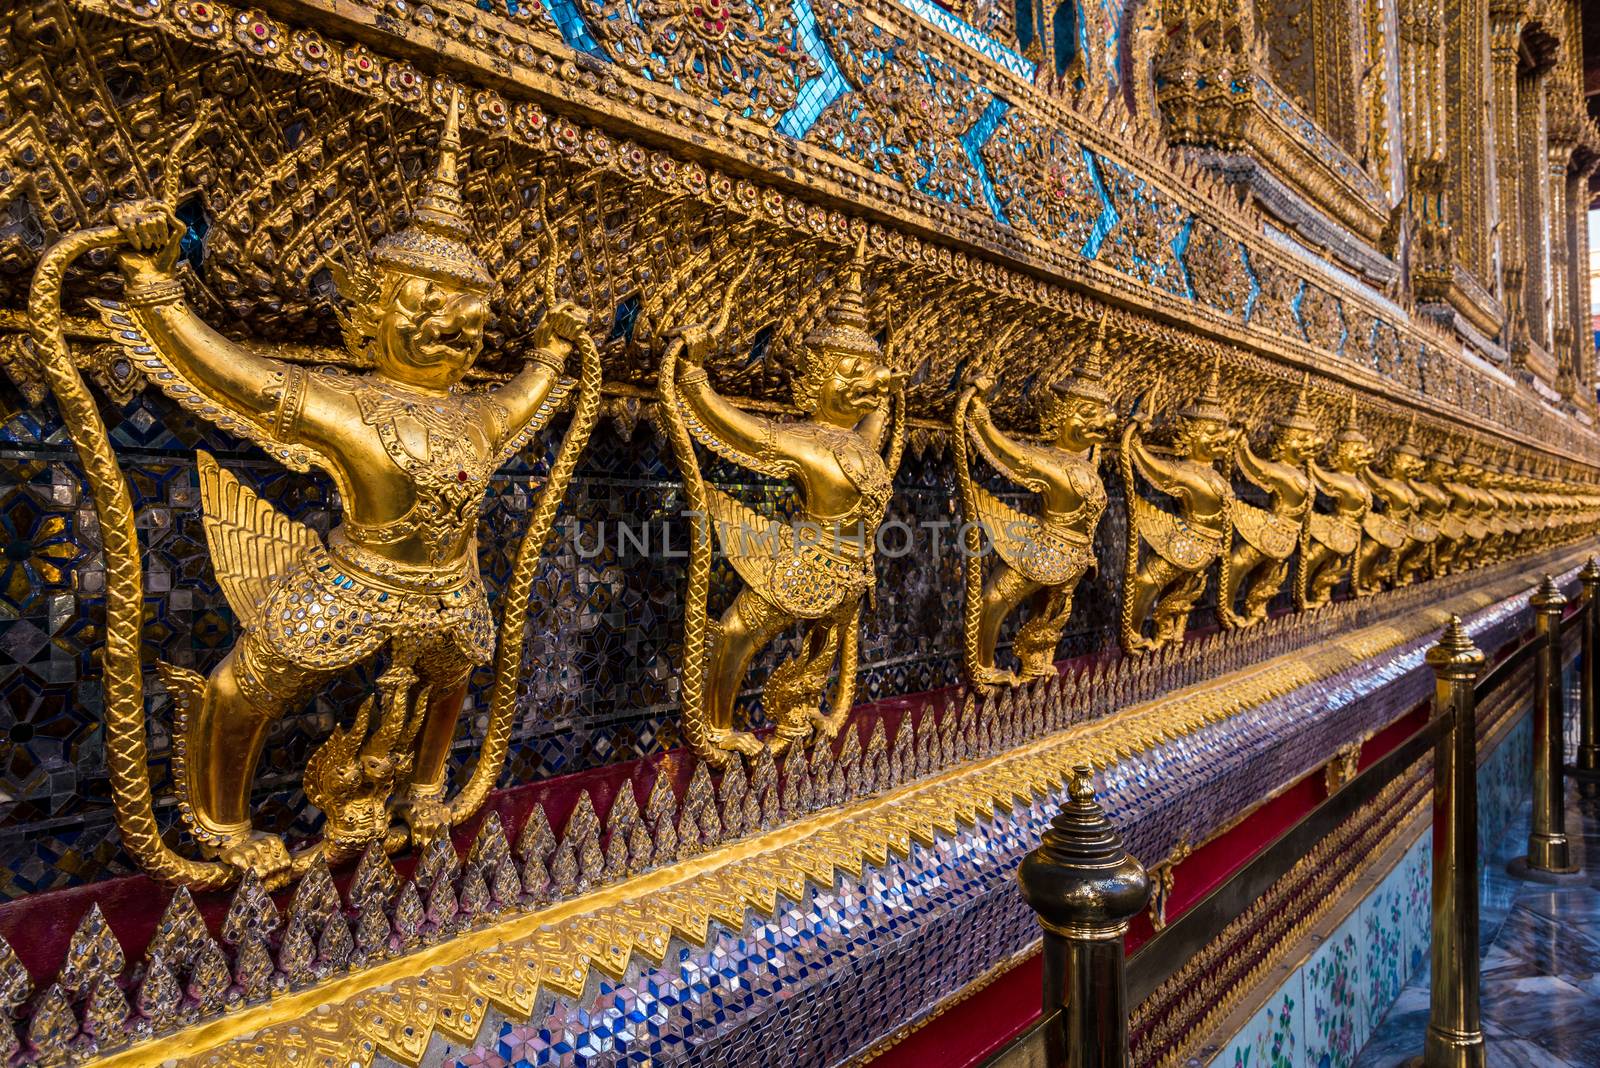 Architecture of emerald buddha temple with golden warriors guarding the temple in Bangkok, Thailand.